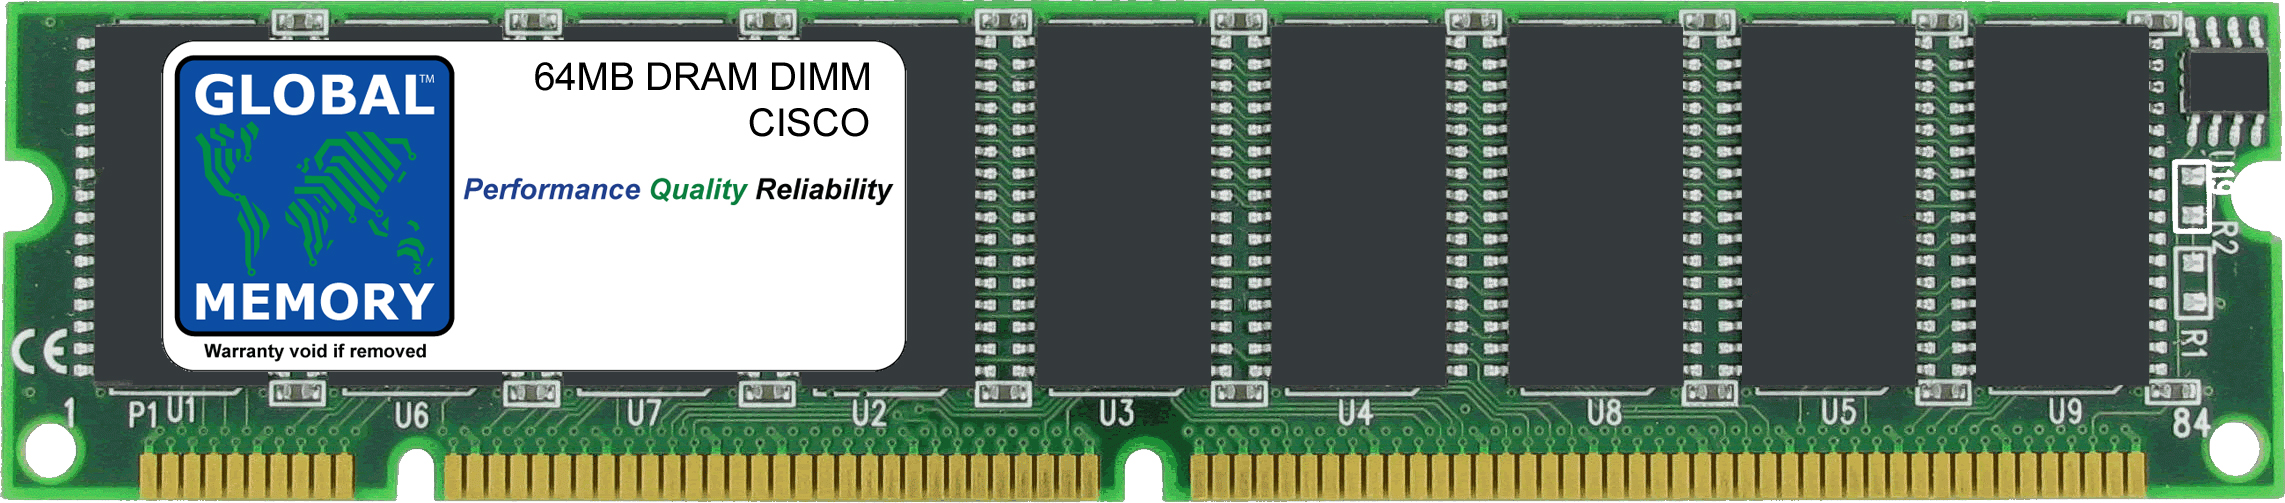 64MB DRAM DIMM MEMORY RAM FOR CISCO 7500 SERIES ROUTERS ROUTE SWITCH PROCESSOR 4 (MEM-RSP4-64M)